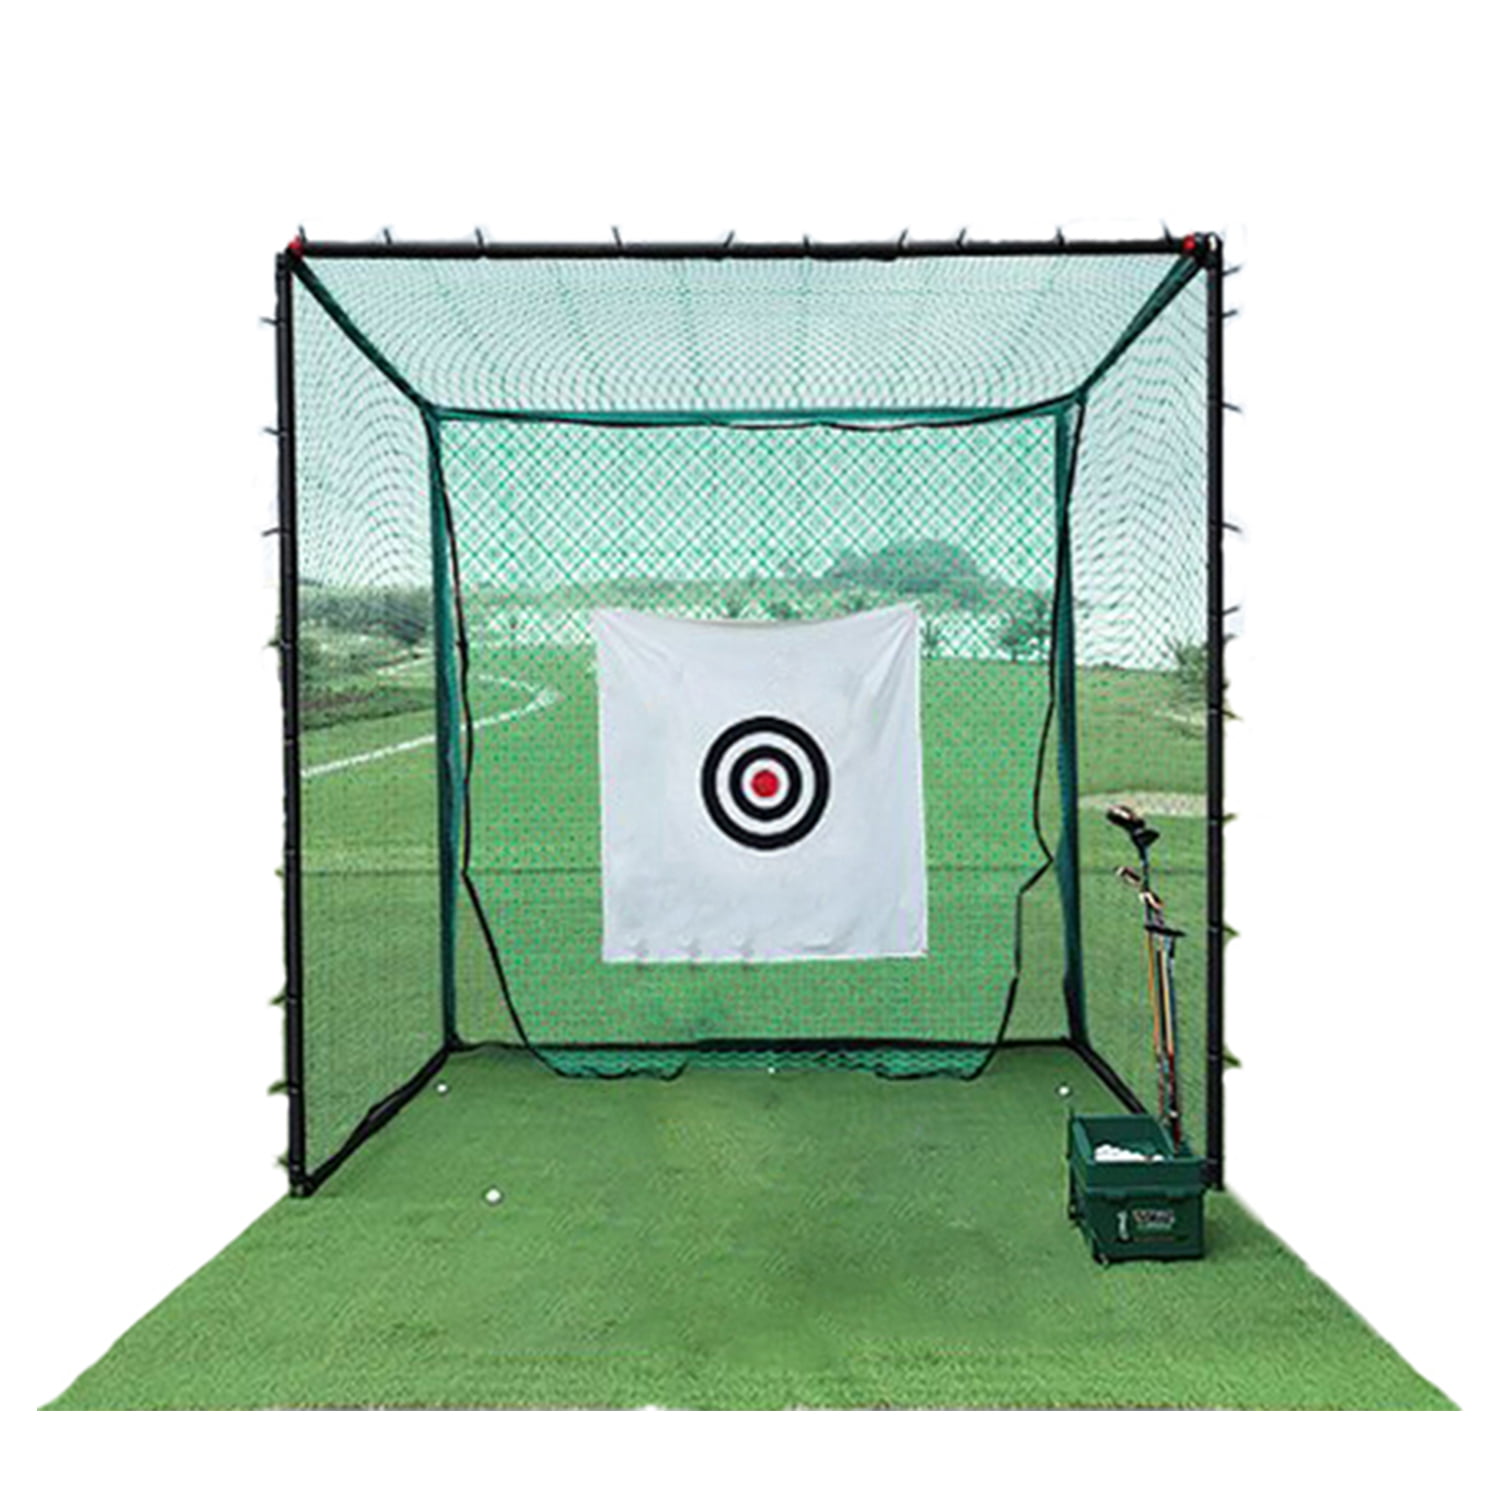 INTBUYING Golf Practice Net Foldable Golf Hitting Cage Practice Network  Venue 9.8x 9.8x 9.8ft